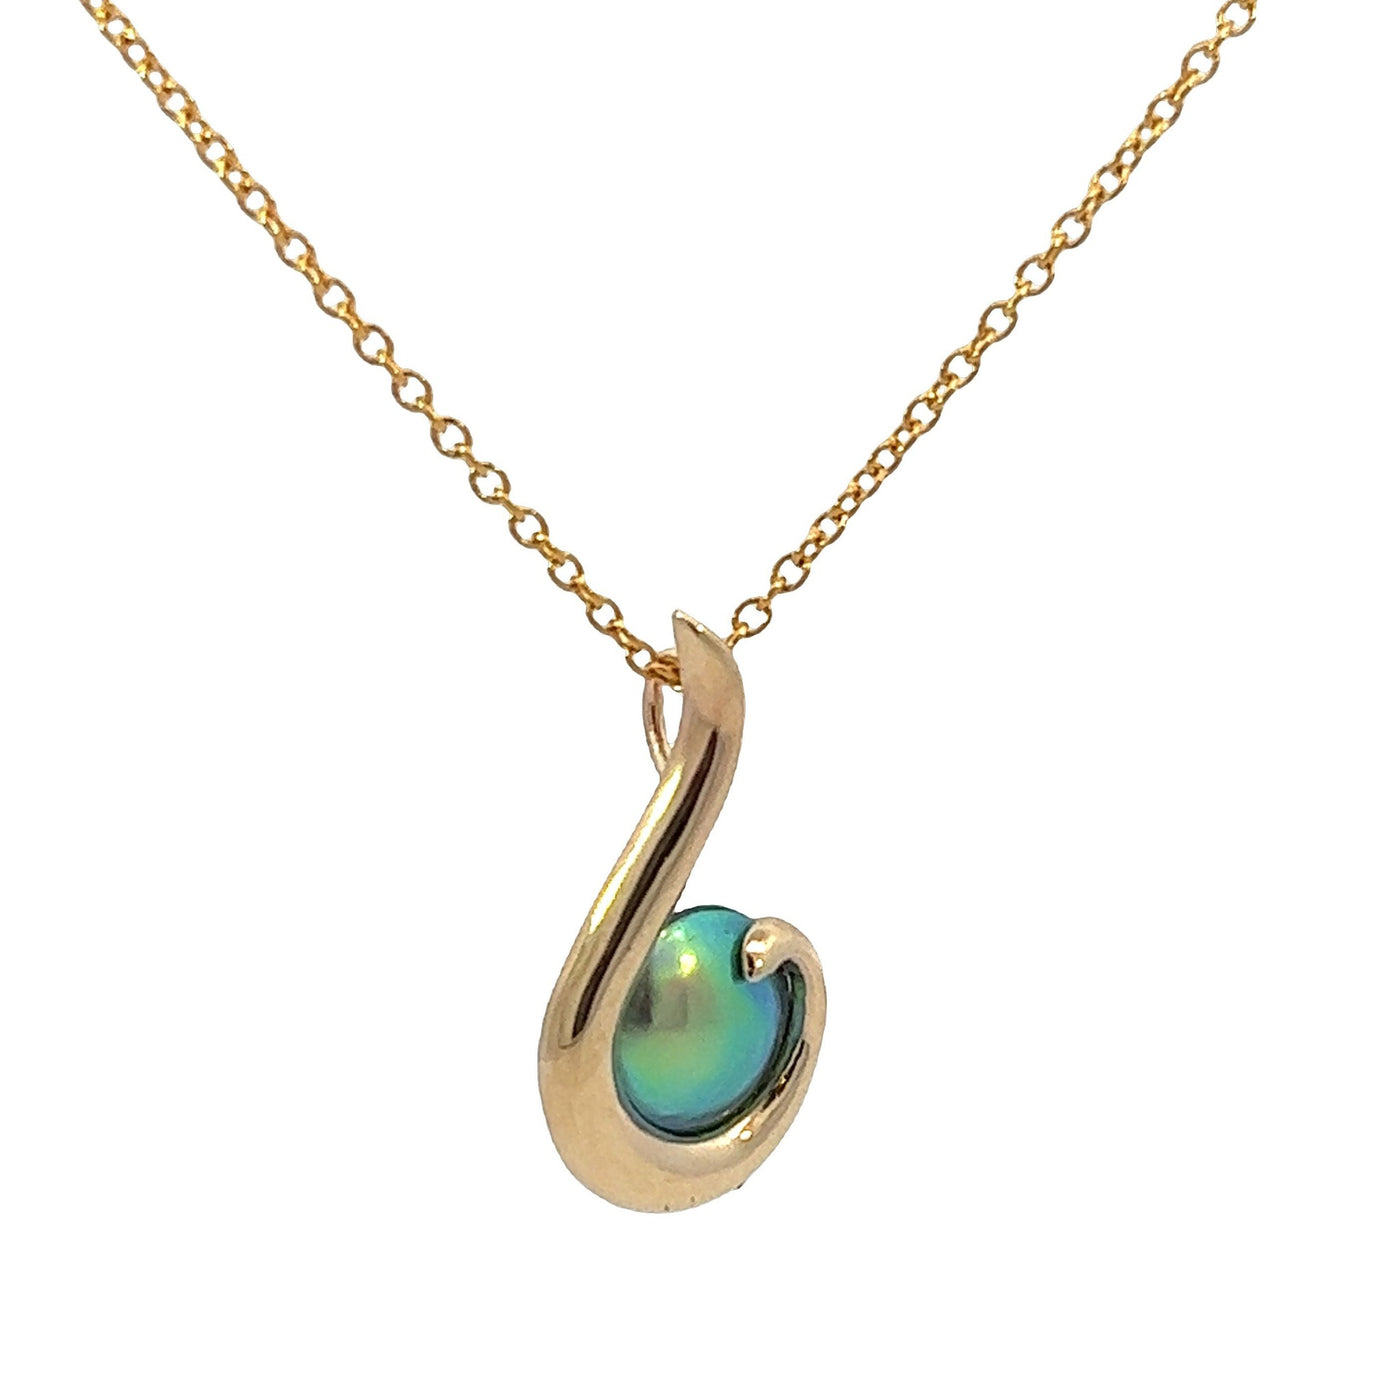 Pearl Arapawa Curve Hook Necklace - Small